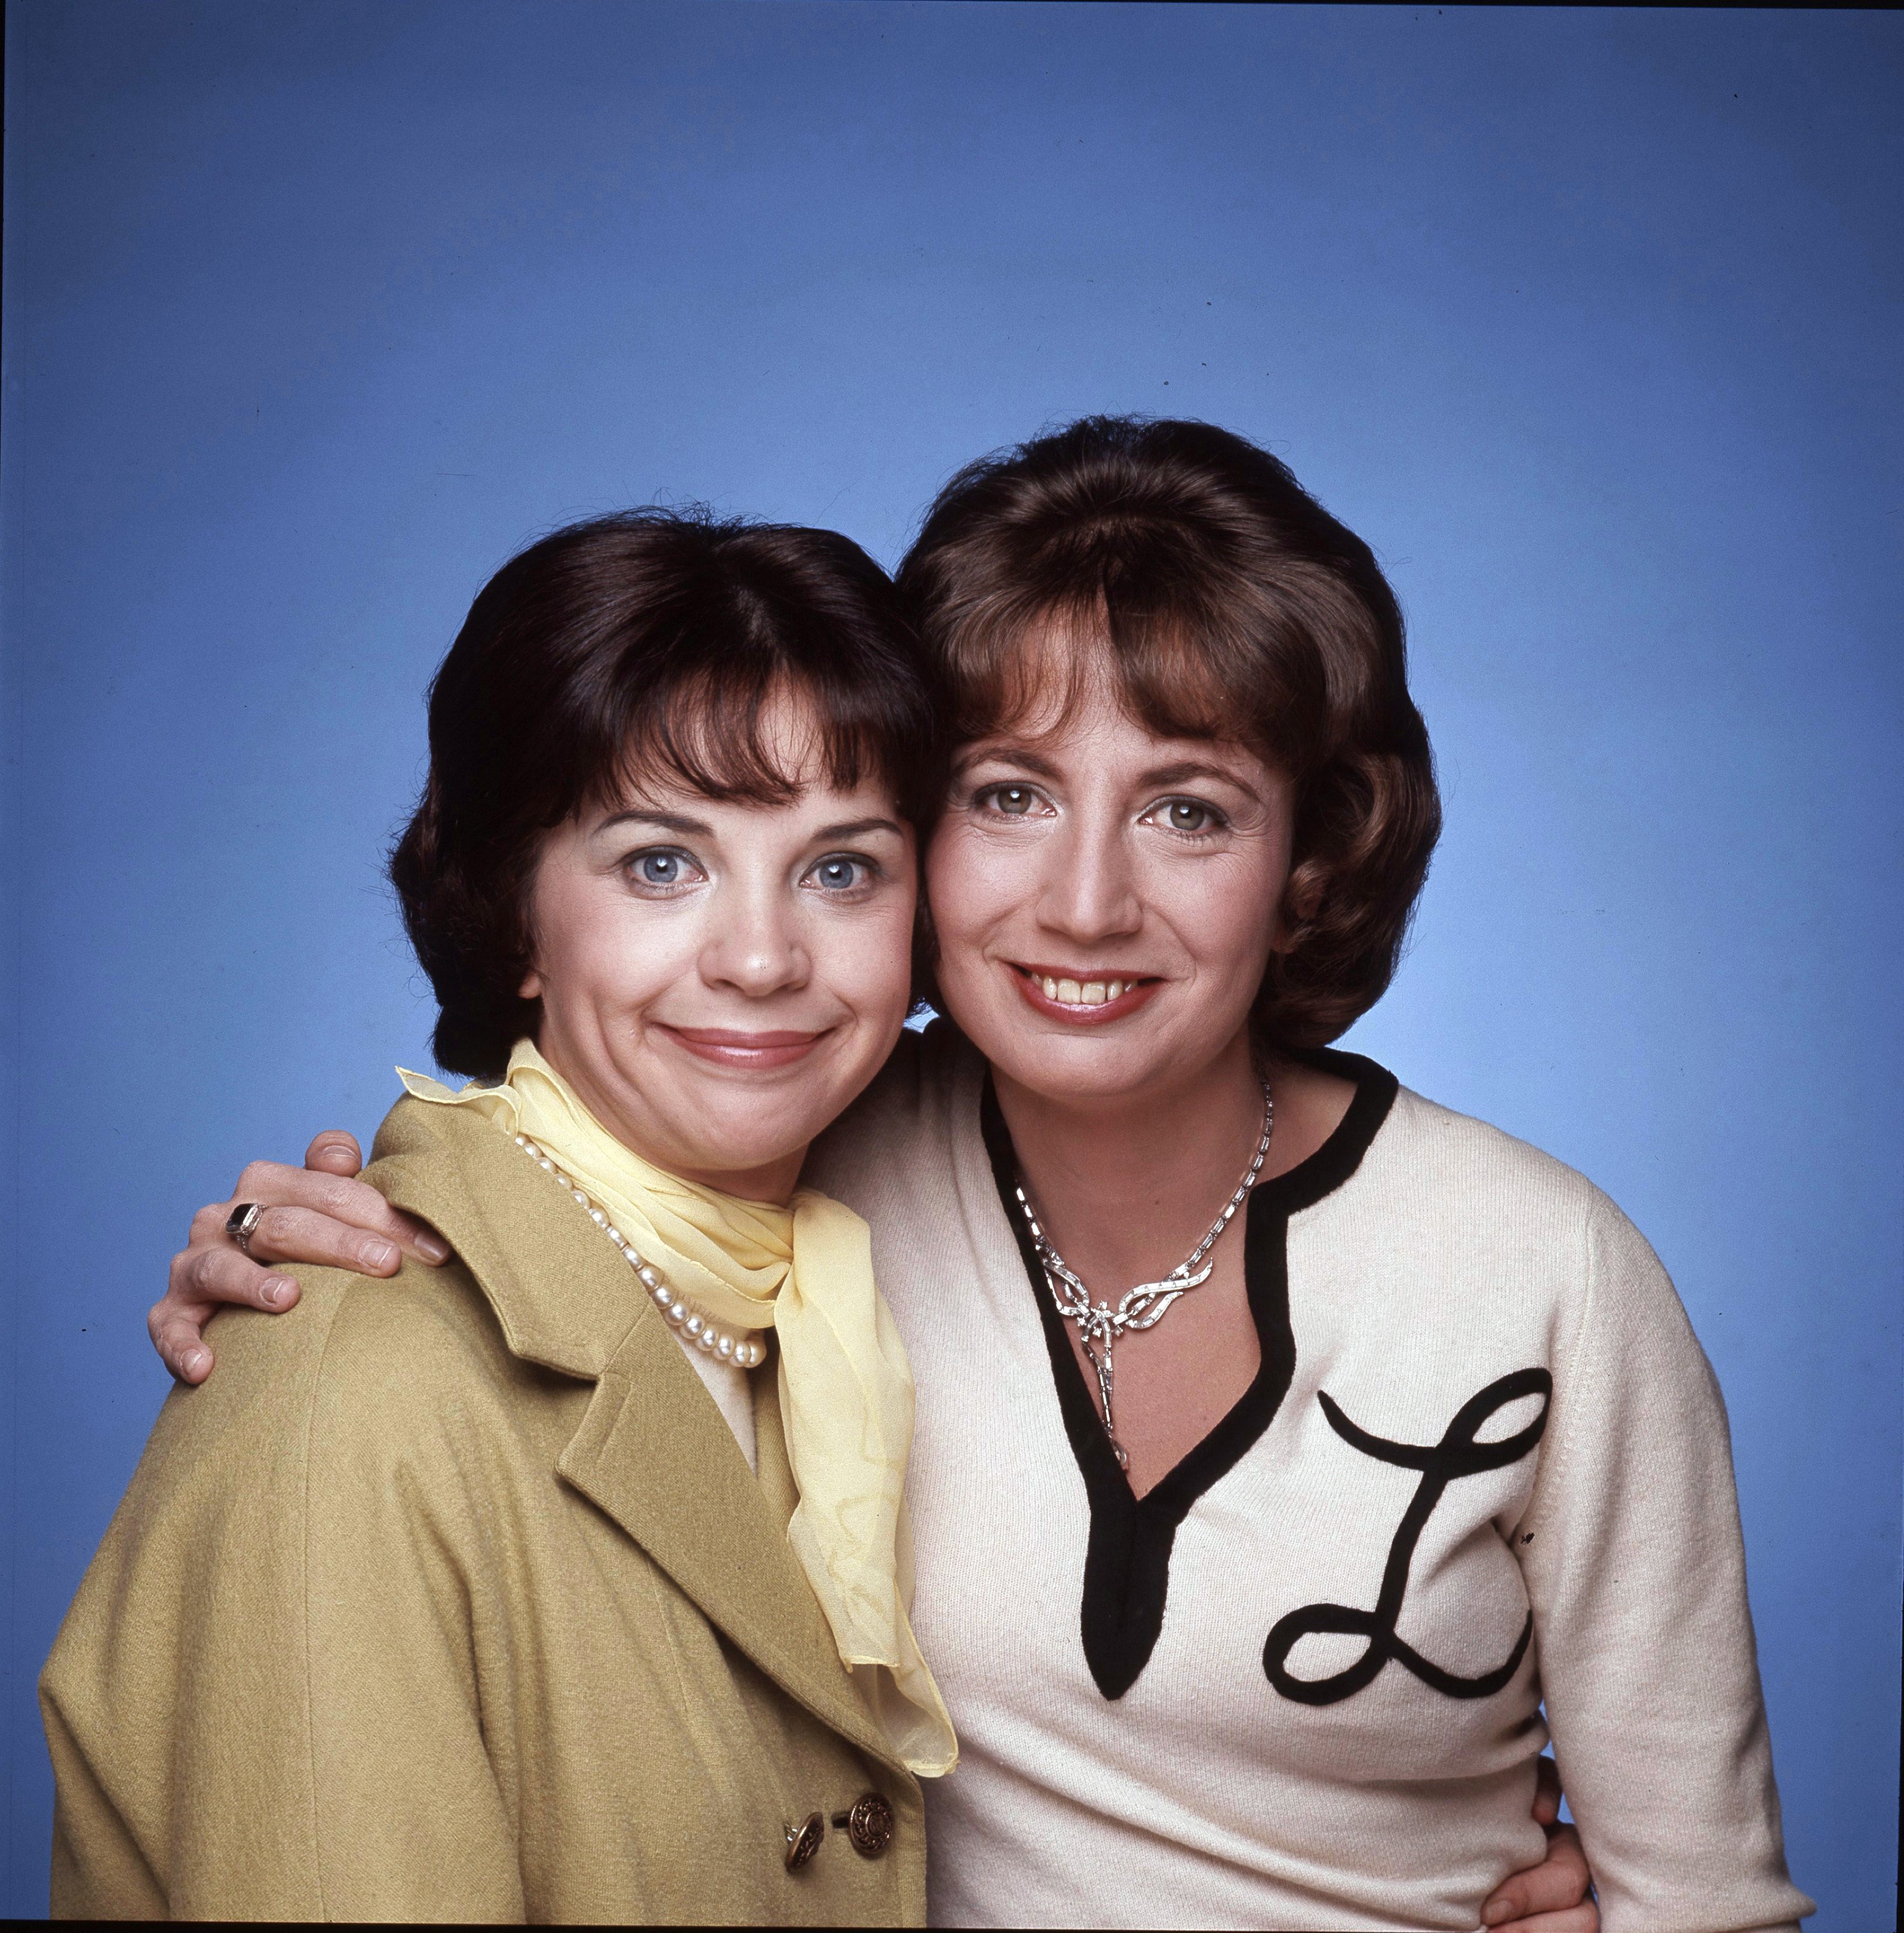 Actors Cindy Williams and Penny Marshall in a promotional photo for the "Laverne and Shirley," sitcom on December 18, 1975 ┃Source: Getty Images